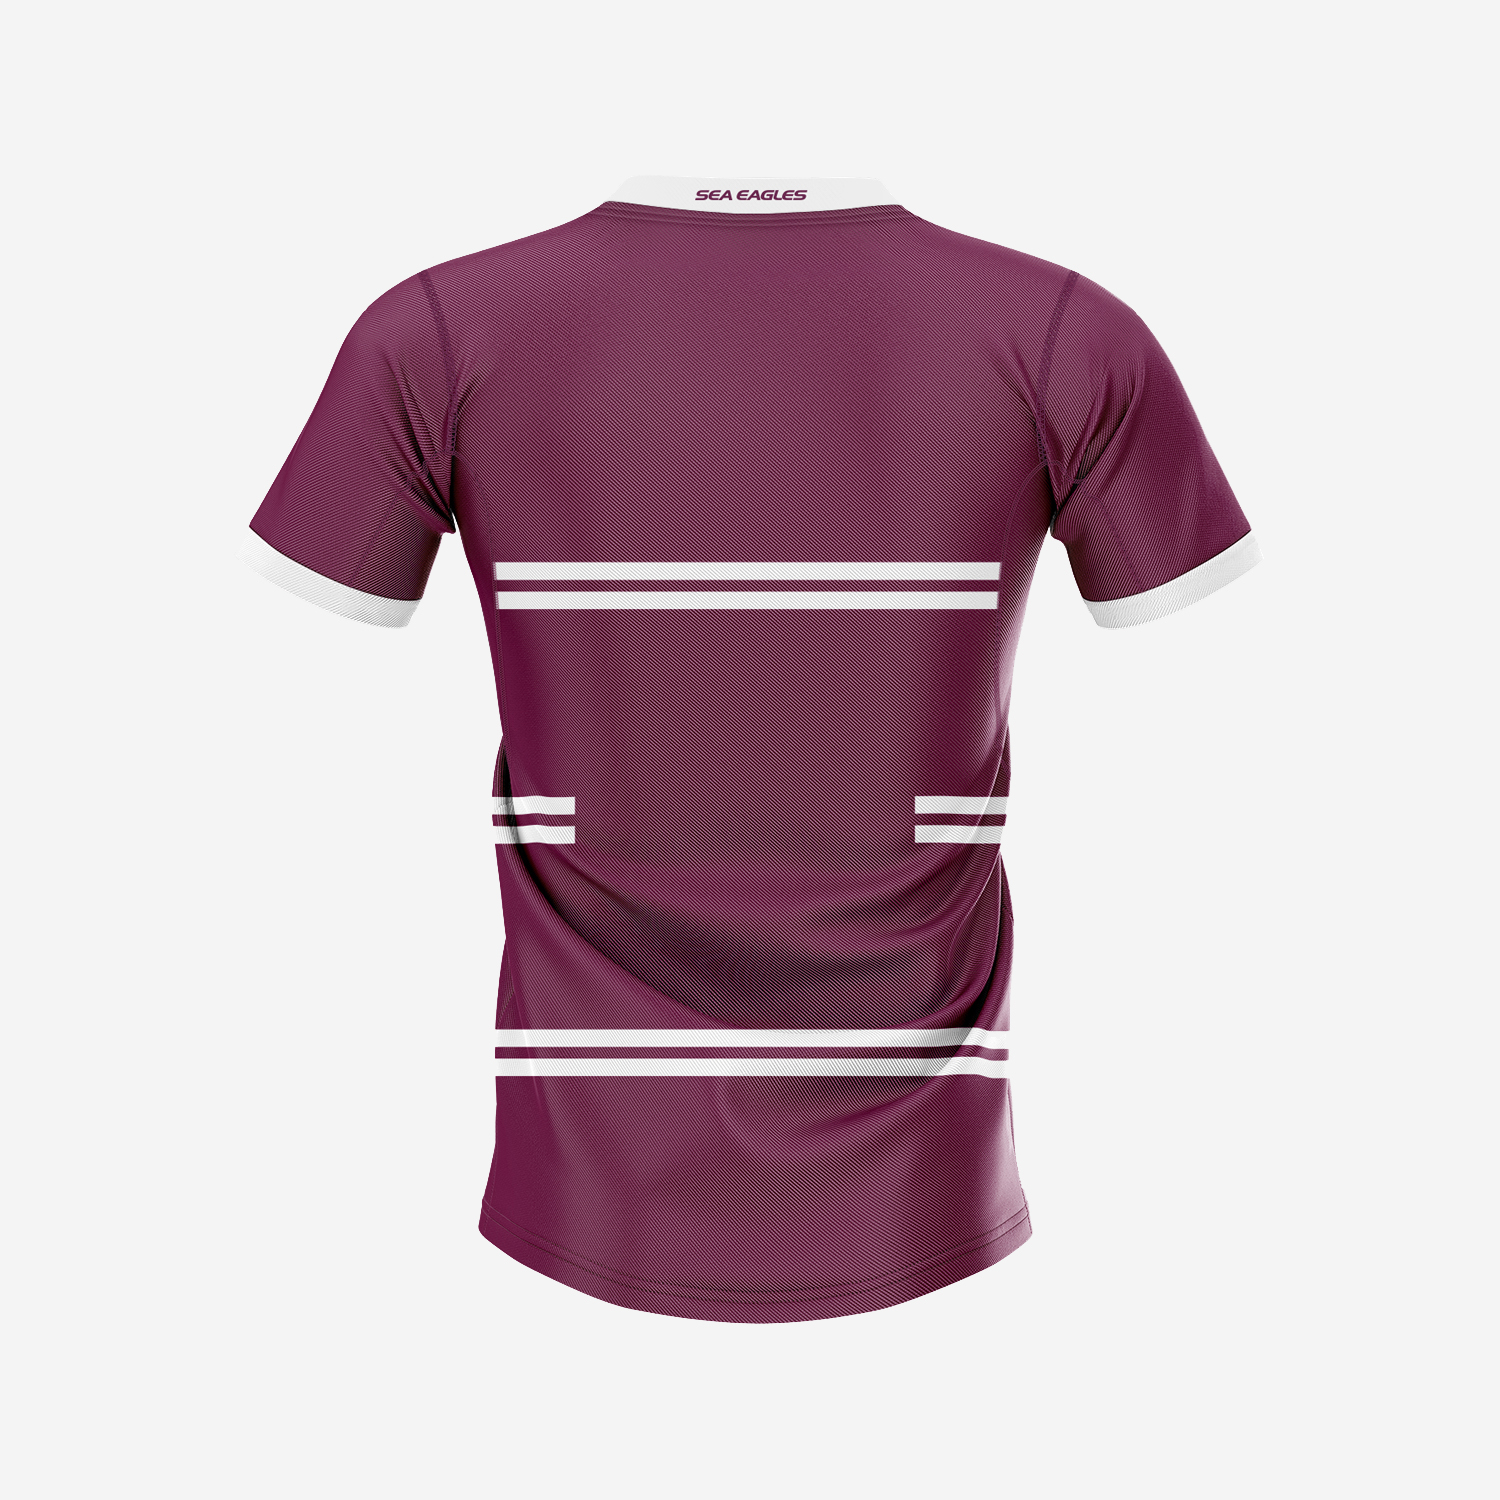 MANLY SEA EAGLES  NRL ADULT JERSEY